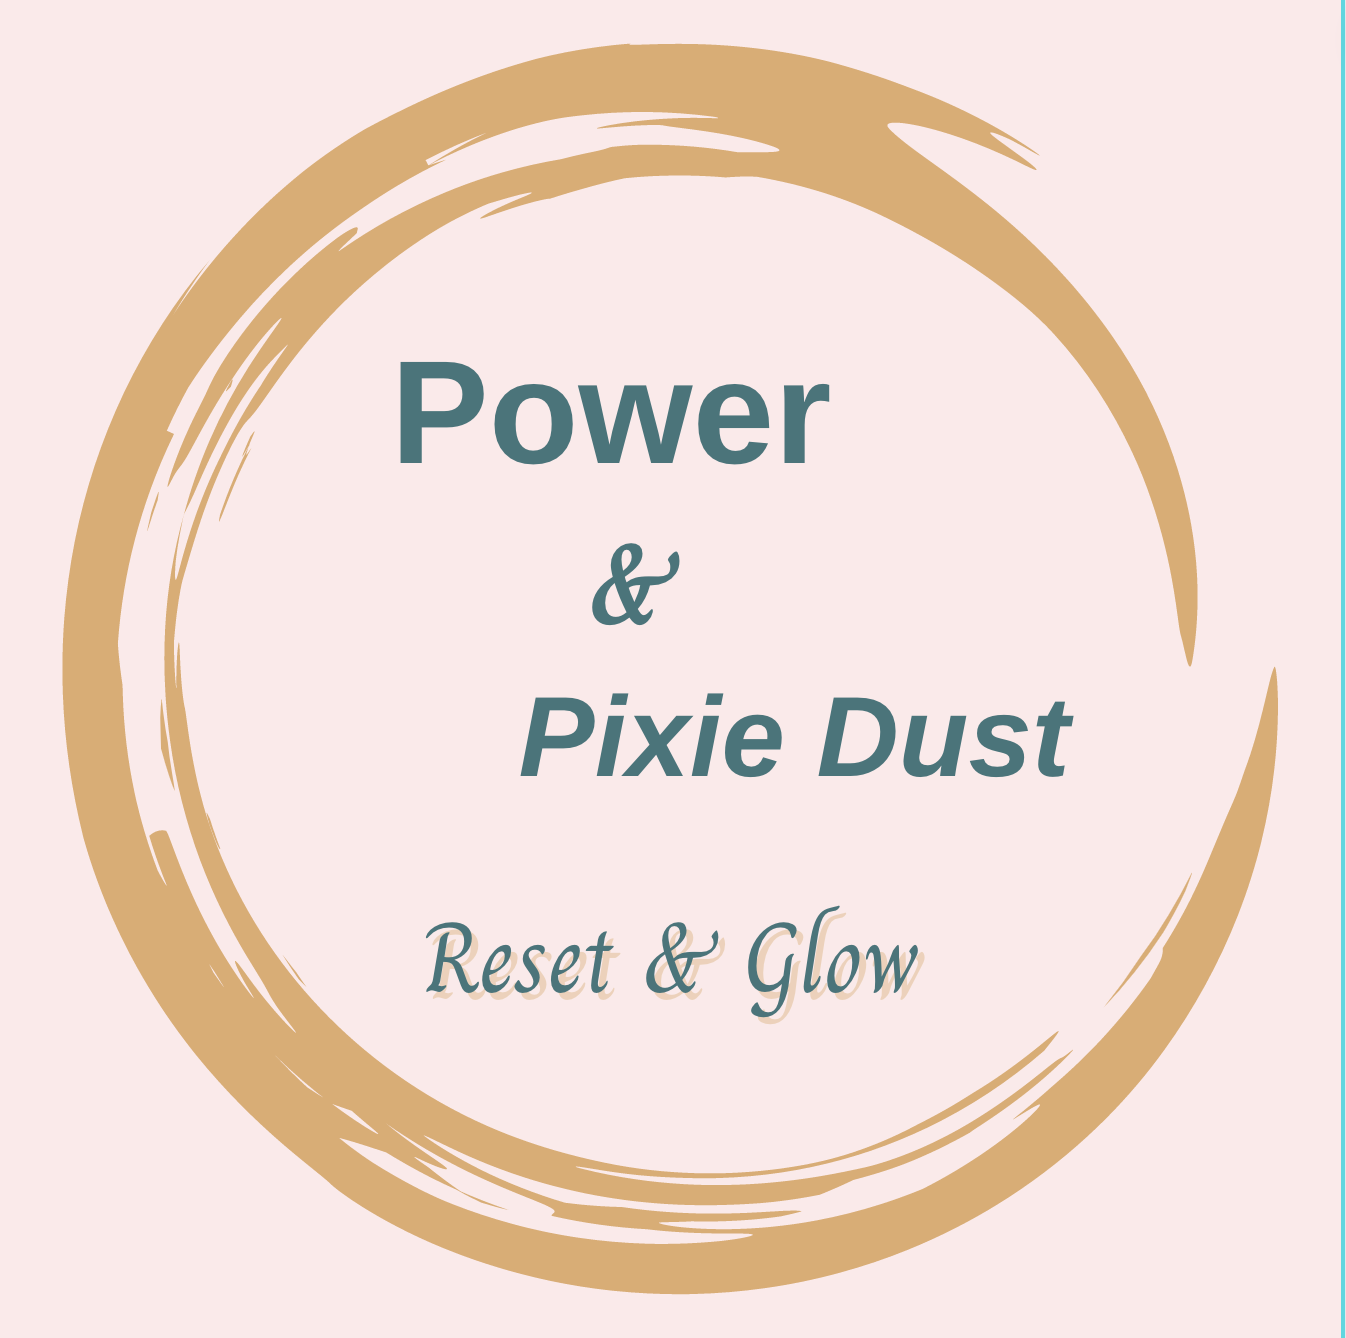 Power and Pixie Dust